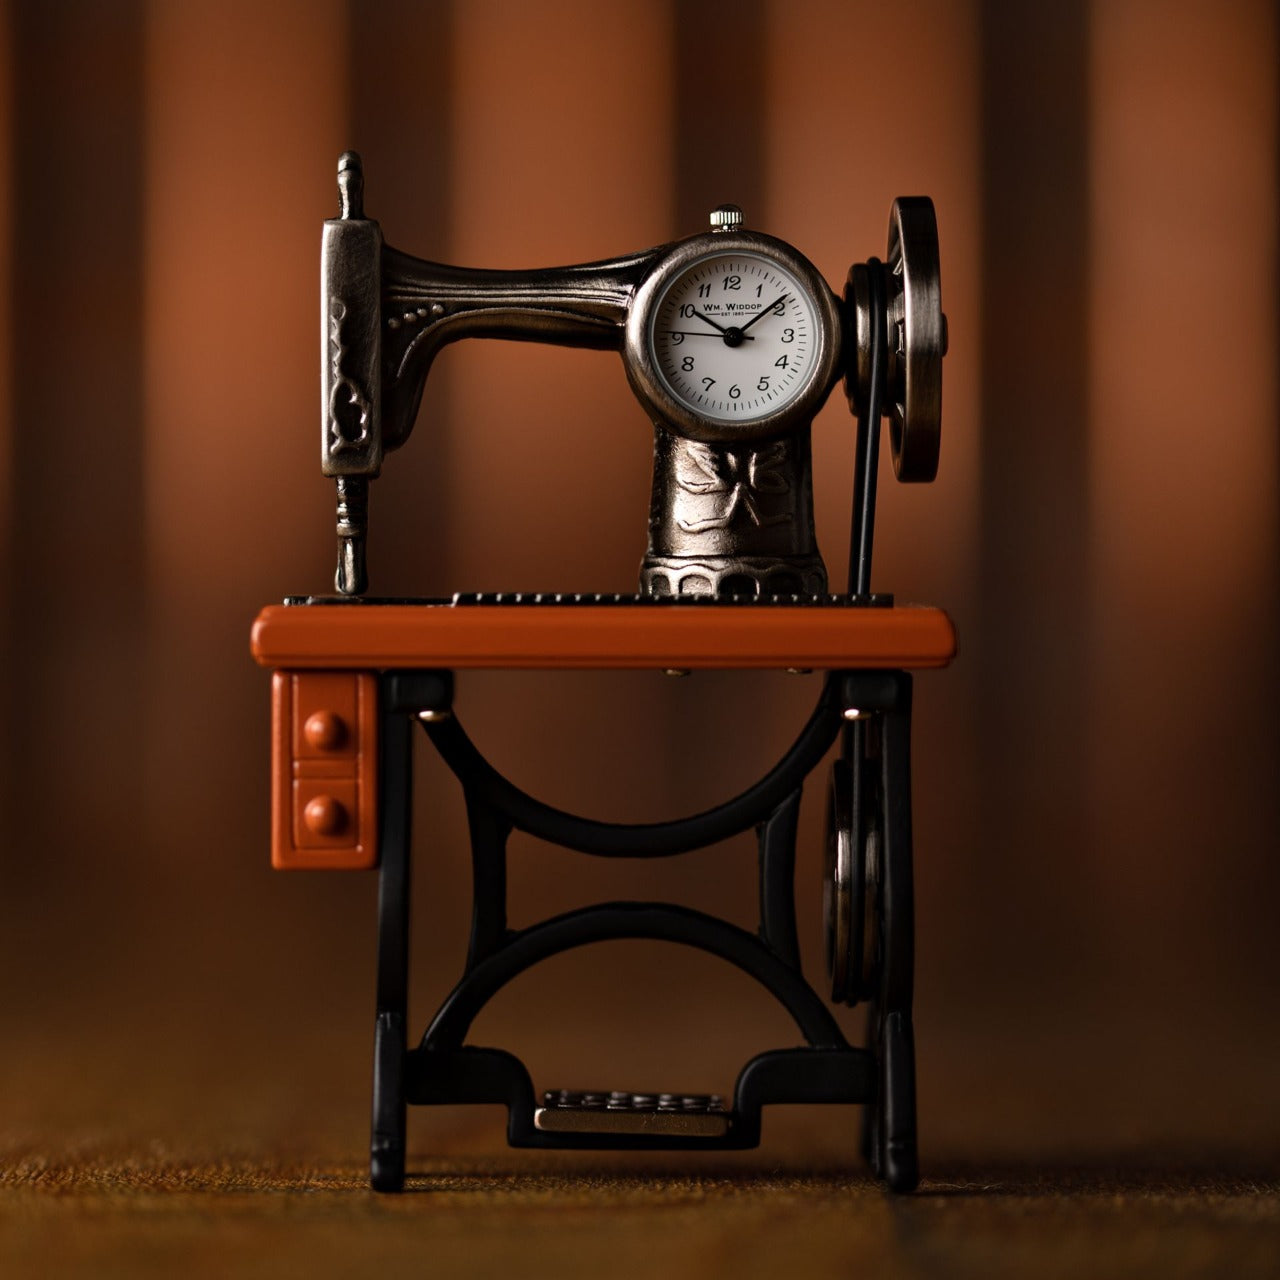 Miniature Clock - Sewing Machine  Bring a uniquely refreshing touch to the home with this stylish miniature clock made with great attention to detail.